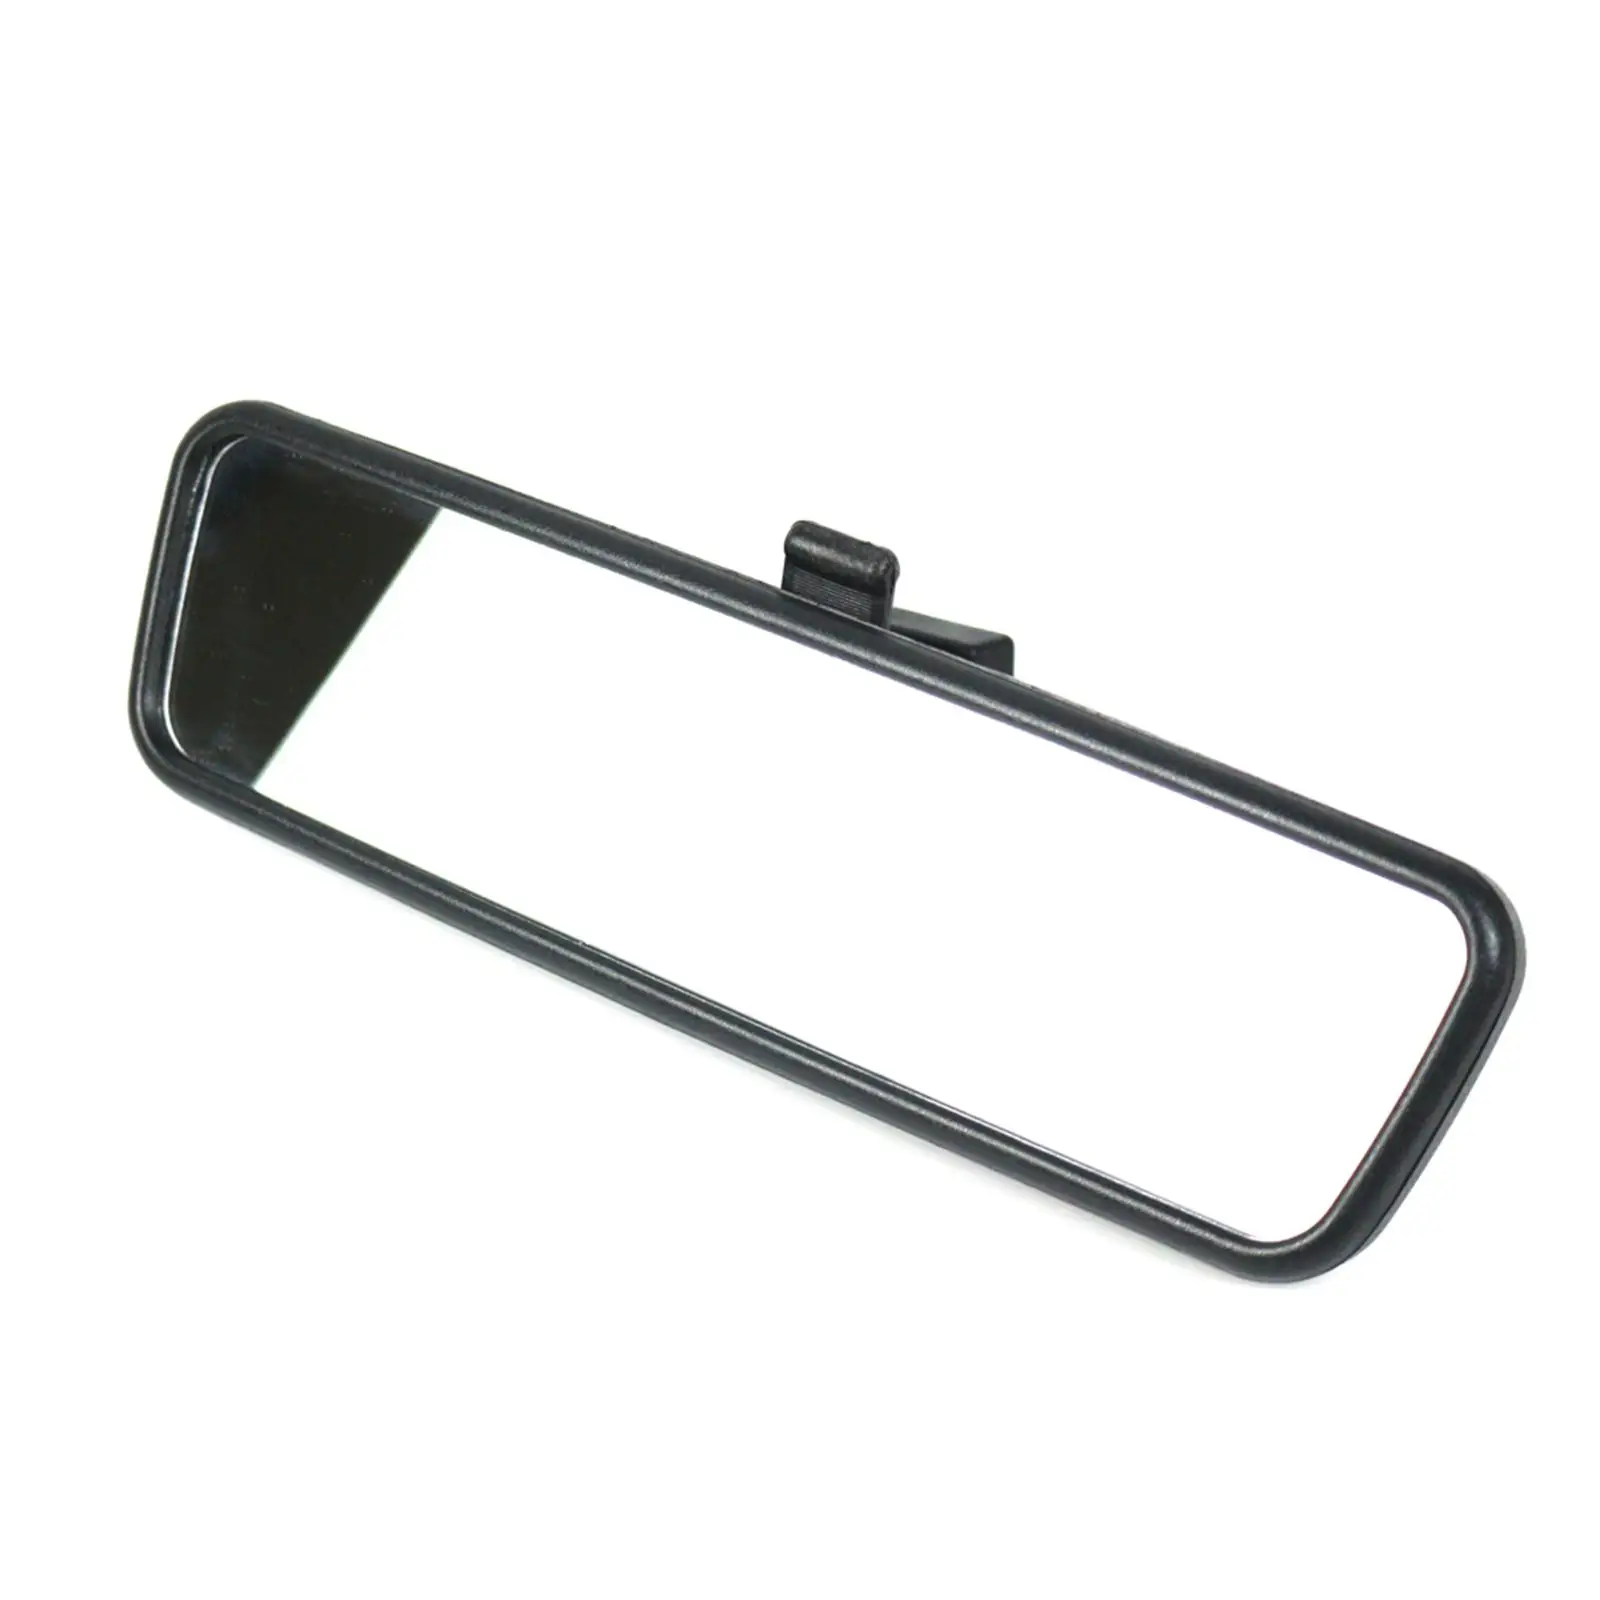 Interior Rear View Mirror 814842 for Renault Automotive Direct Replaces